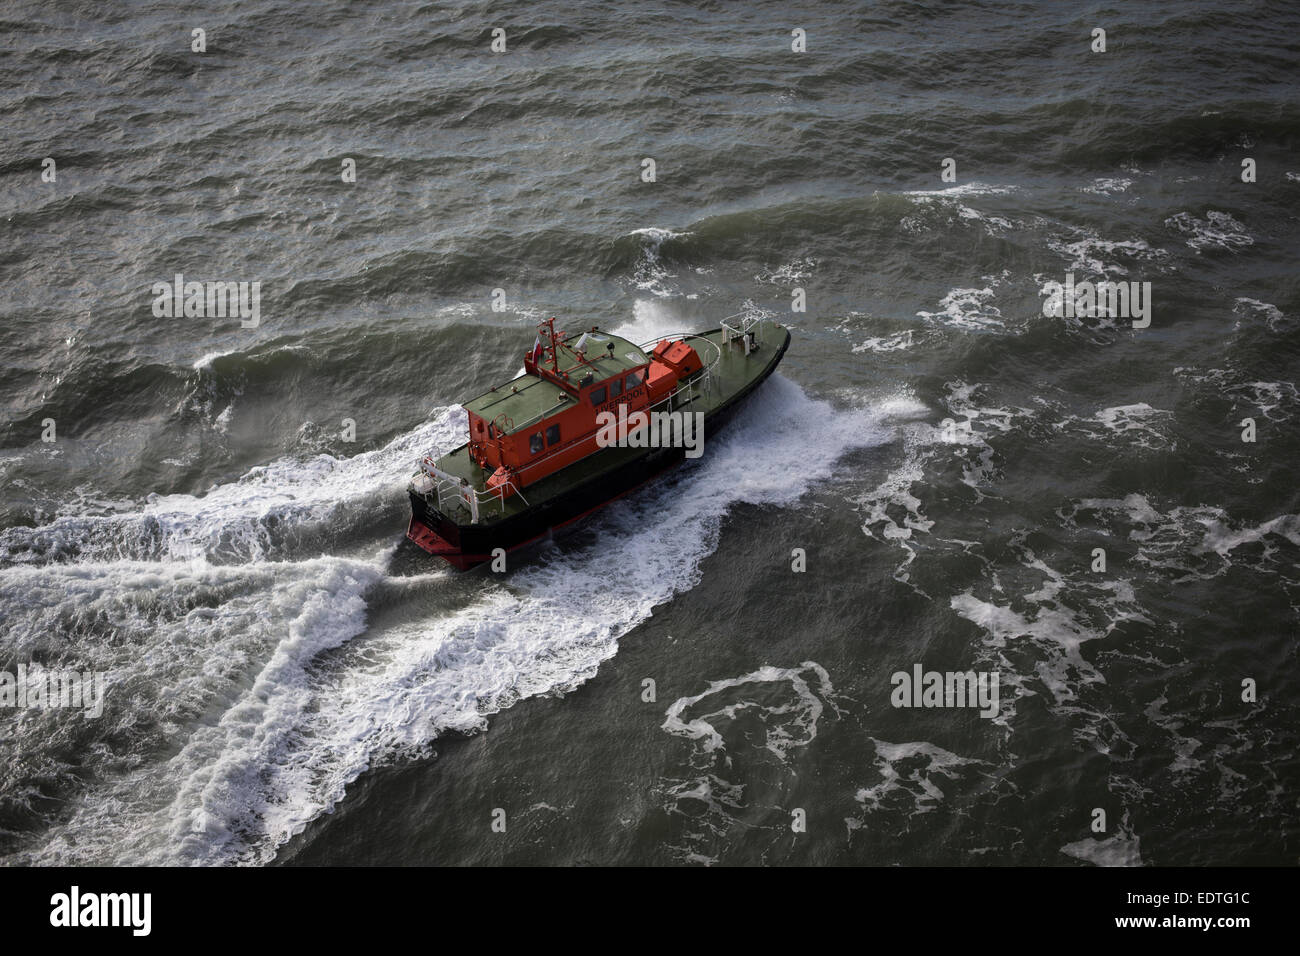 A pilot launch of the Liverpool Pilotage Service Ltd working in the river Mersey, England, UK. Stock Photo